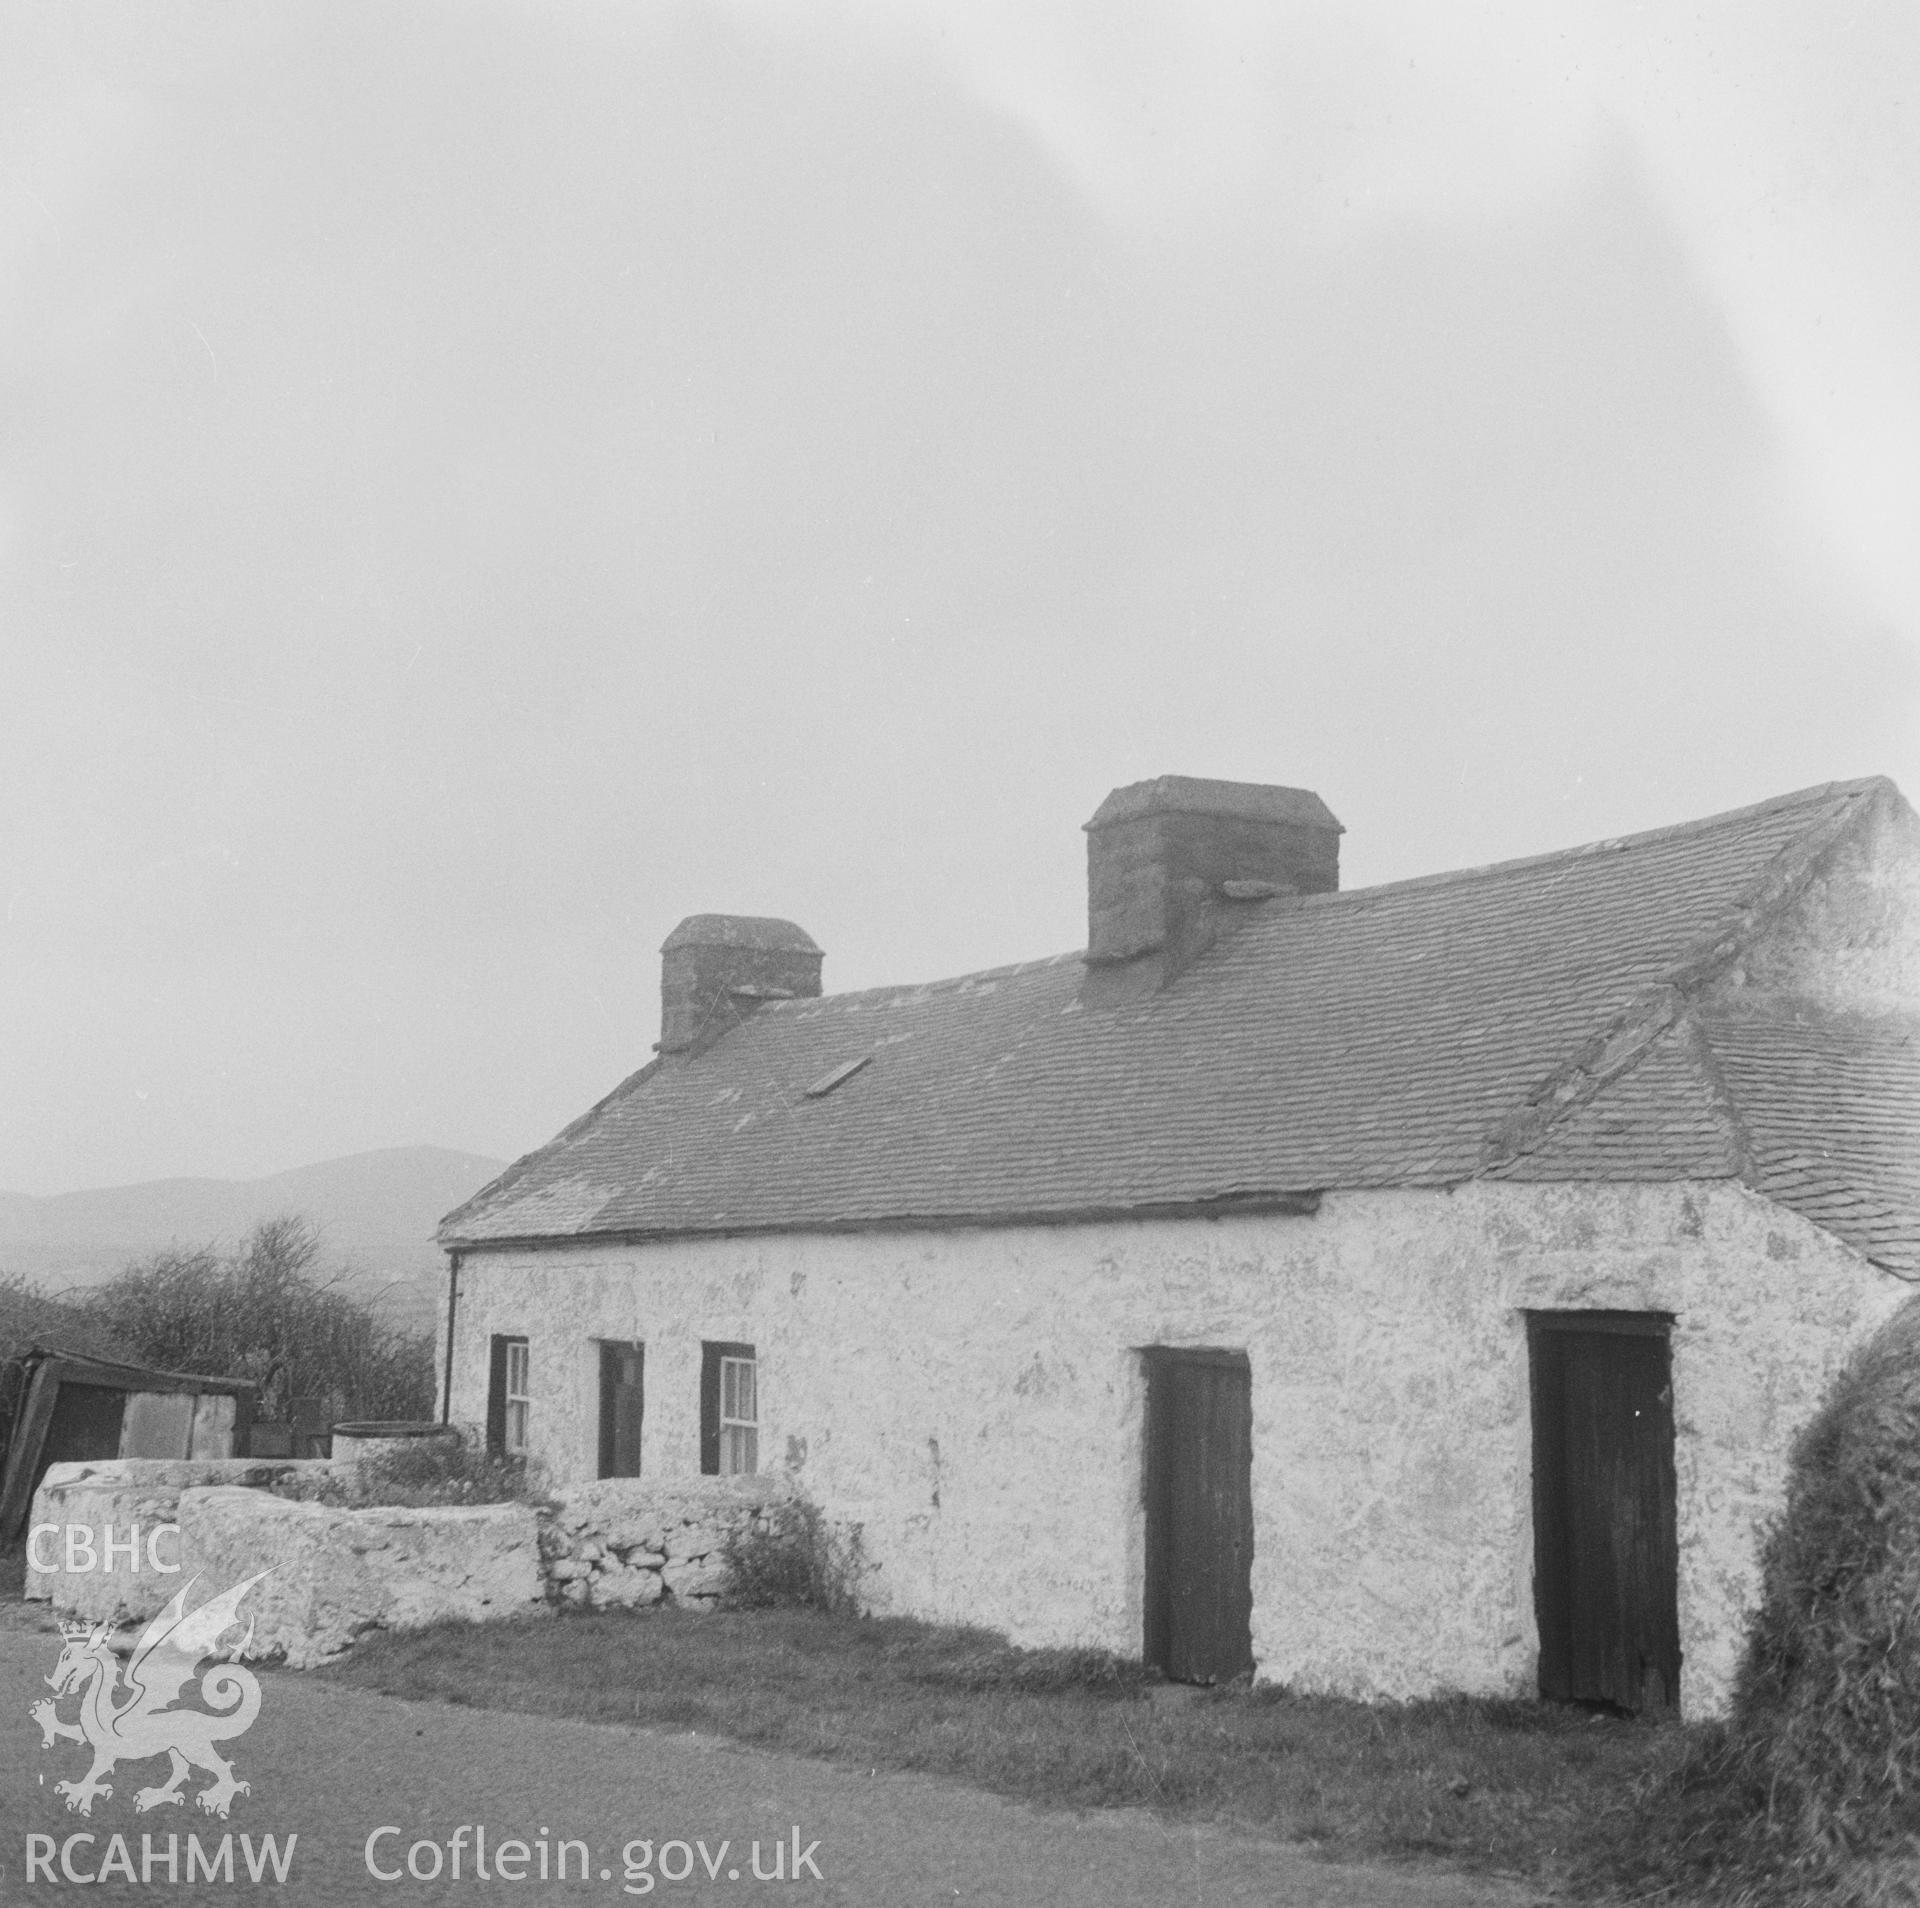 Digital copy of a black and white nitrate negative showing an exterior view of unidentified cottages, captioned 'Caernarfon Cottages'.